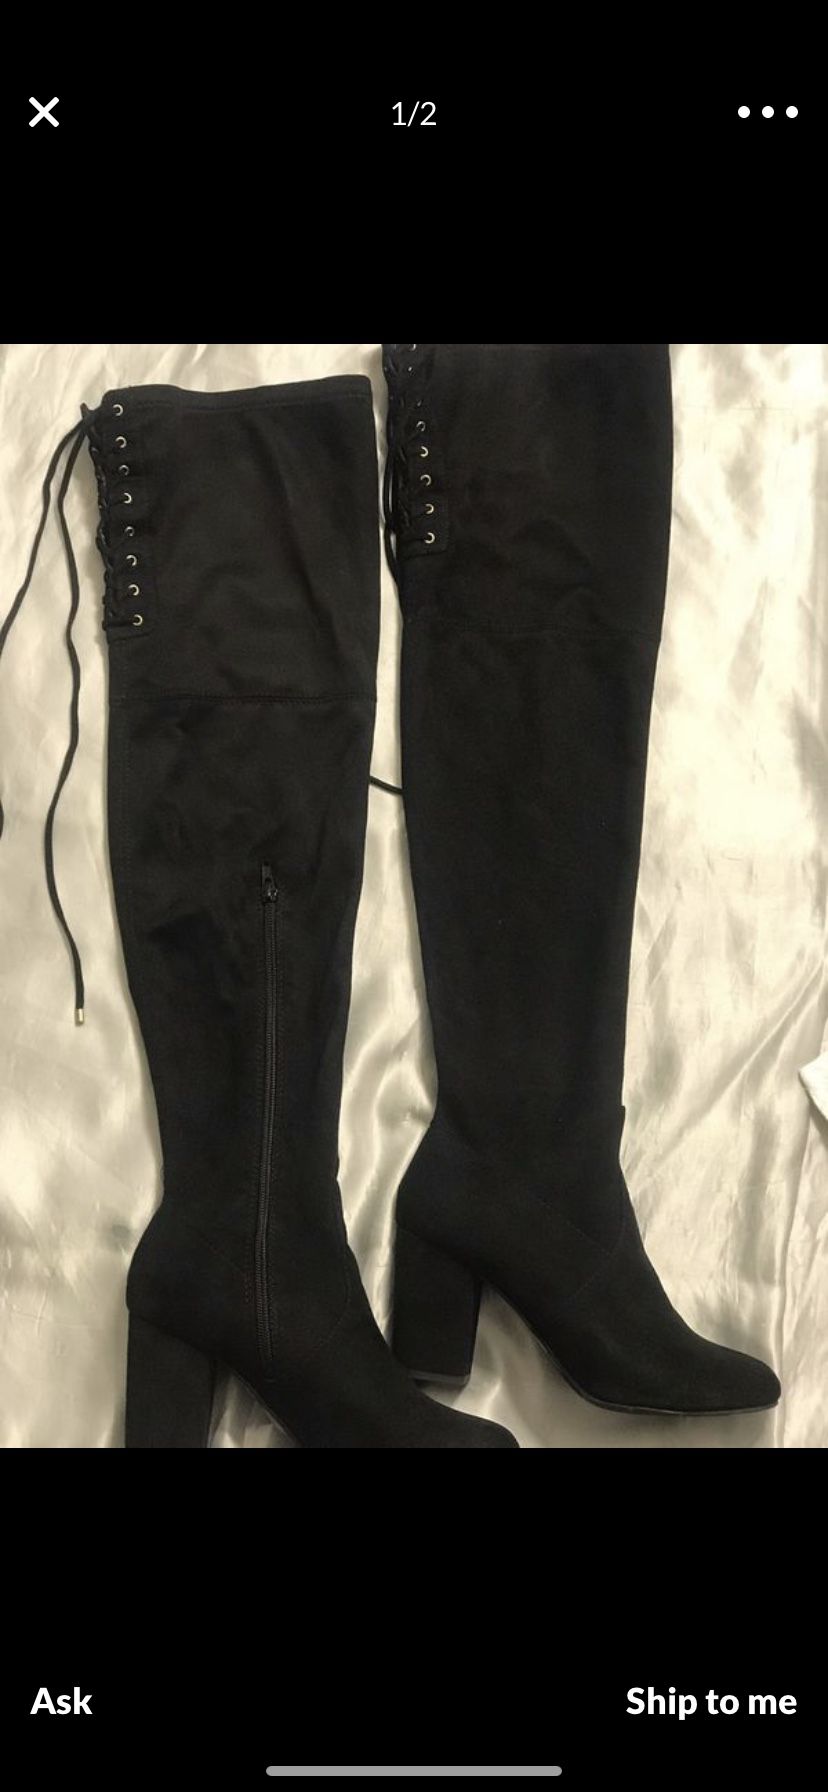 Thigh High Celia Boots size 8